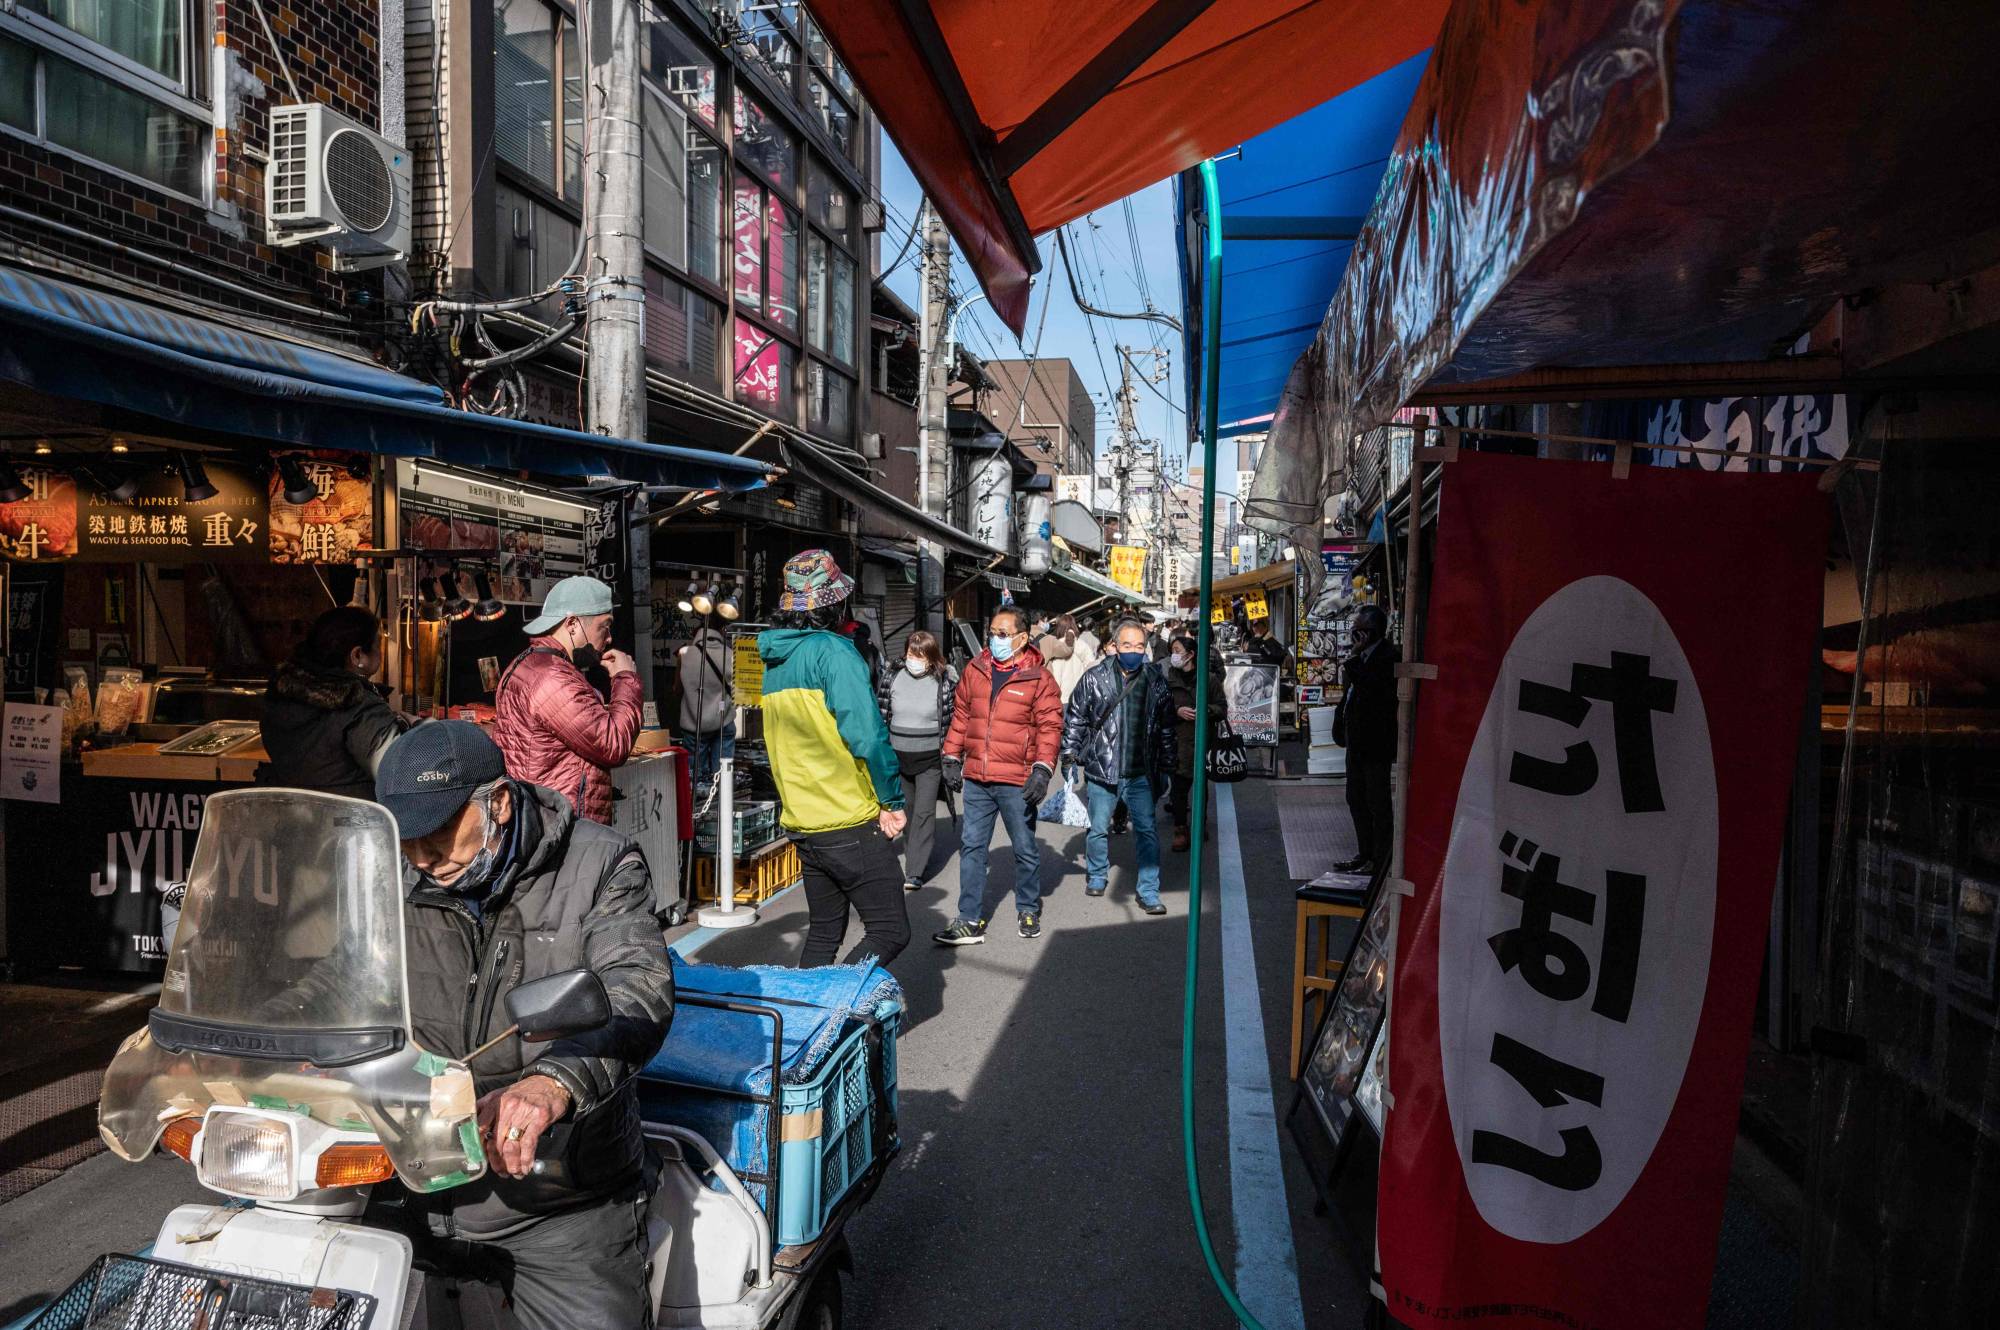 Tokyo's Tsukiji district on Monday. The seven-day average of new COVID-19 cases in the capital stood at 2,652.9 on Wednesday, down 33.7% from a week earlier. | AFP-JIJI